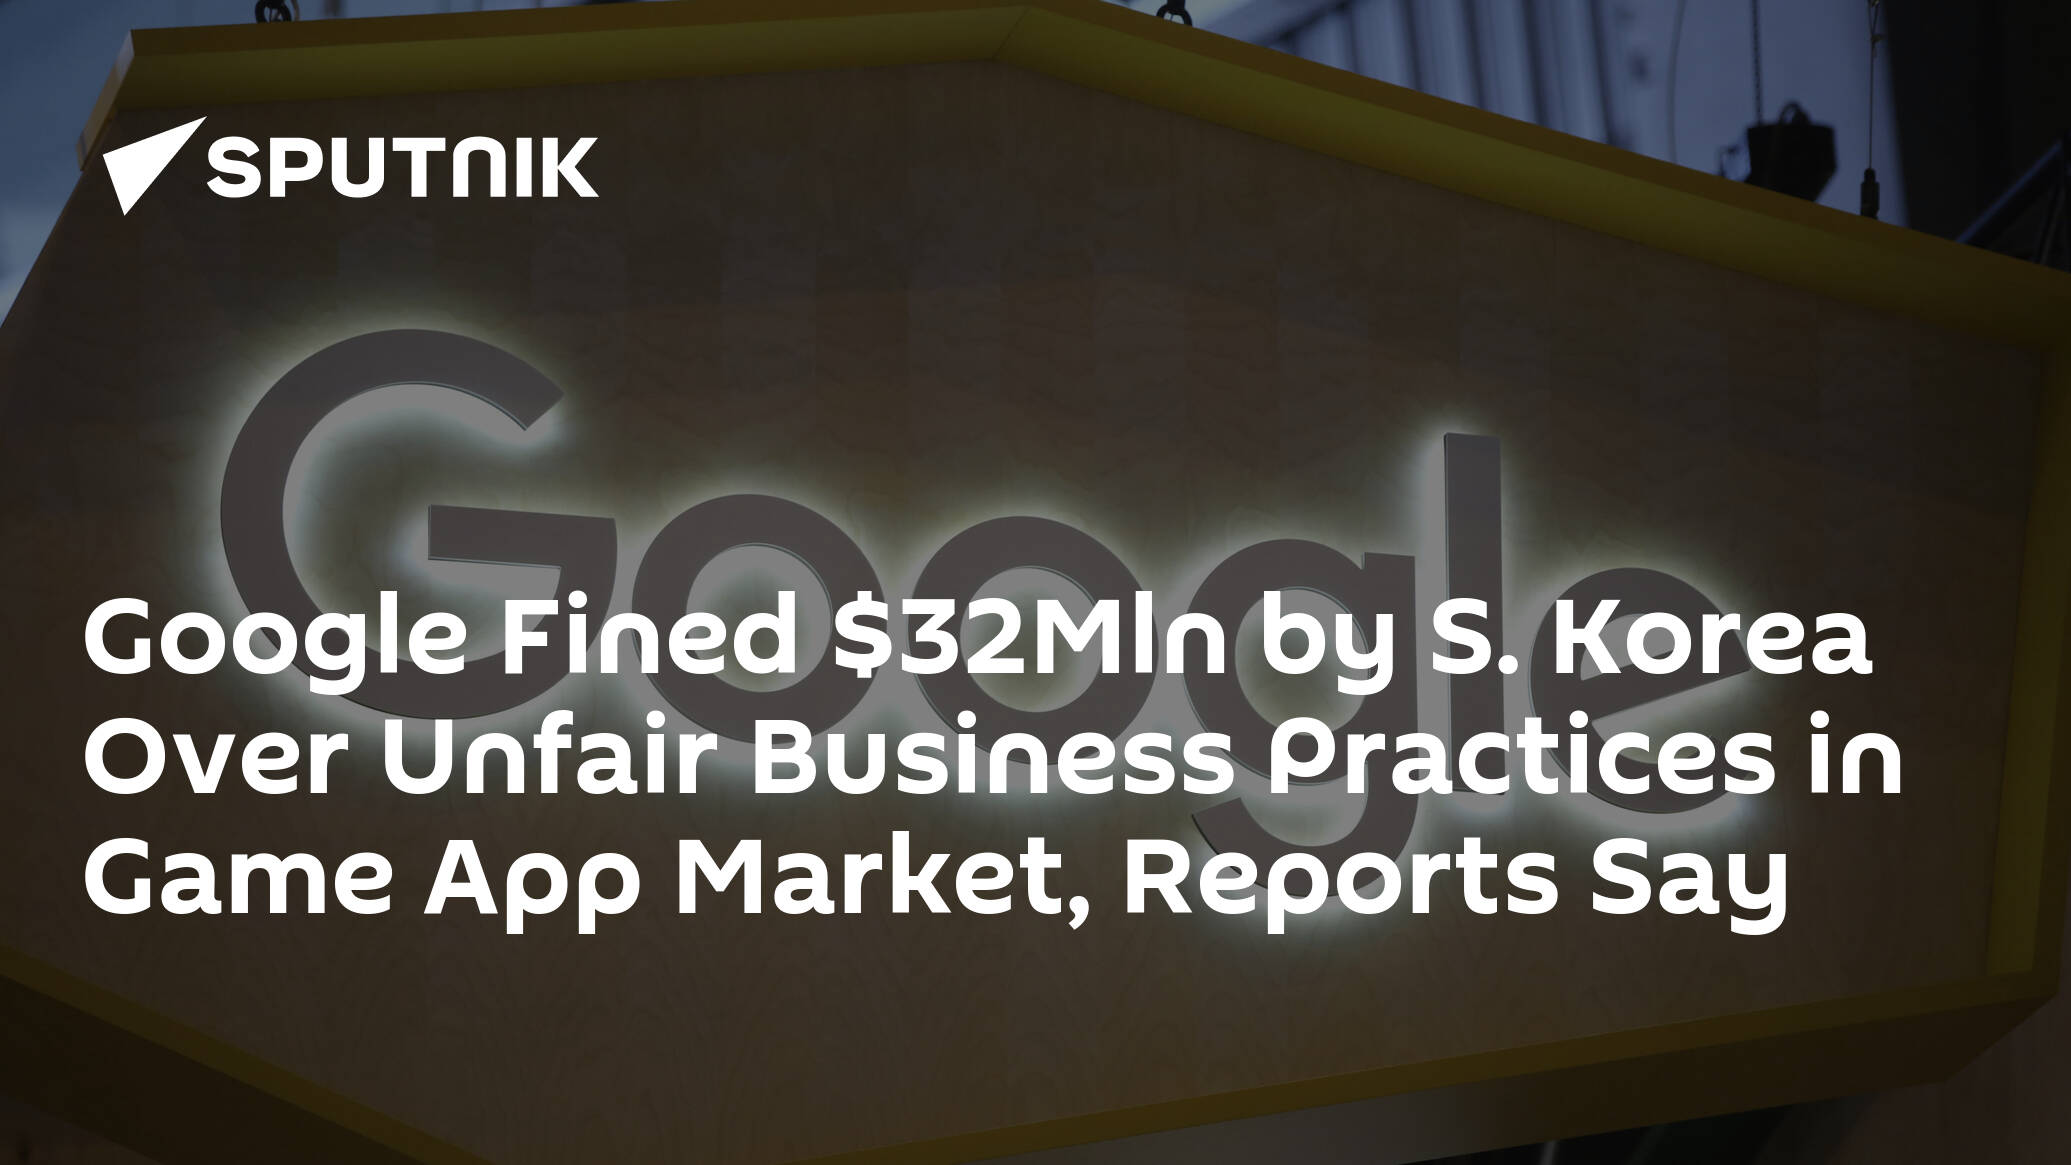 Google Fined Mln by S. Korea Over Unfair Business Practices in Game App Market, Reports Say